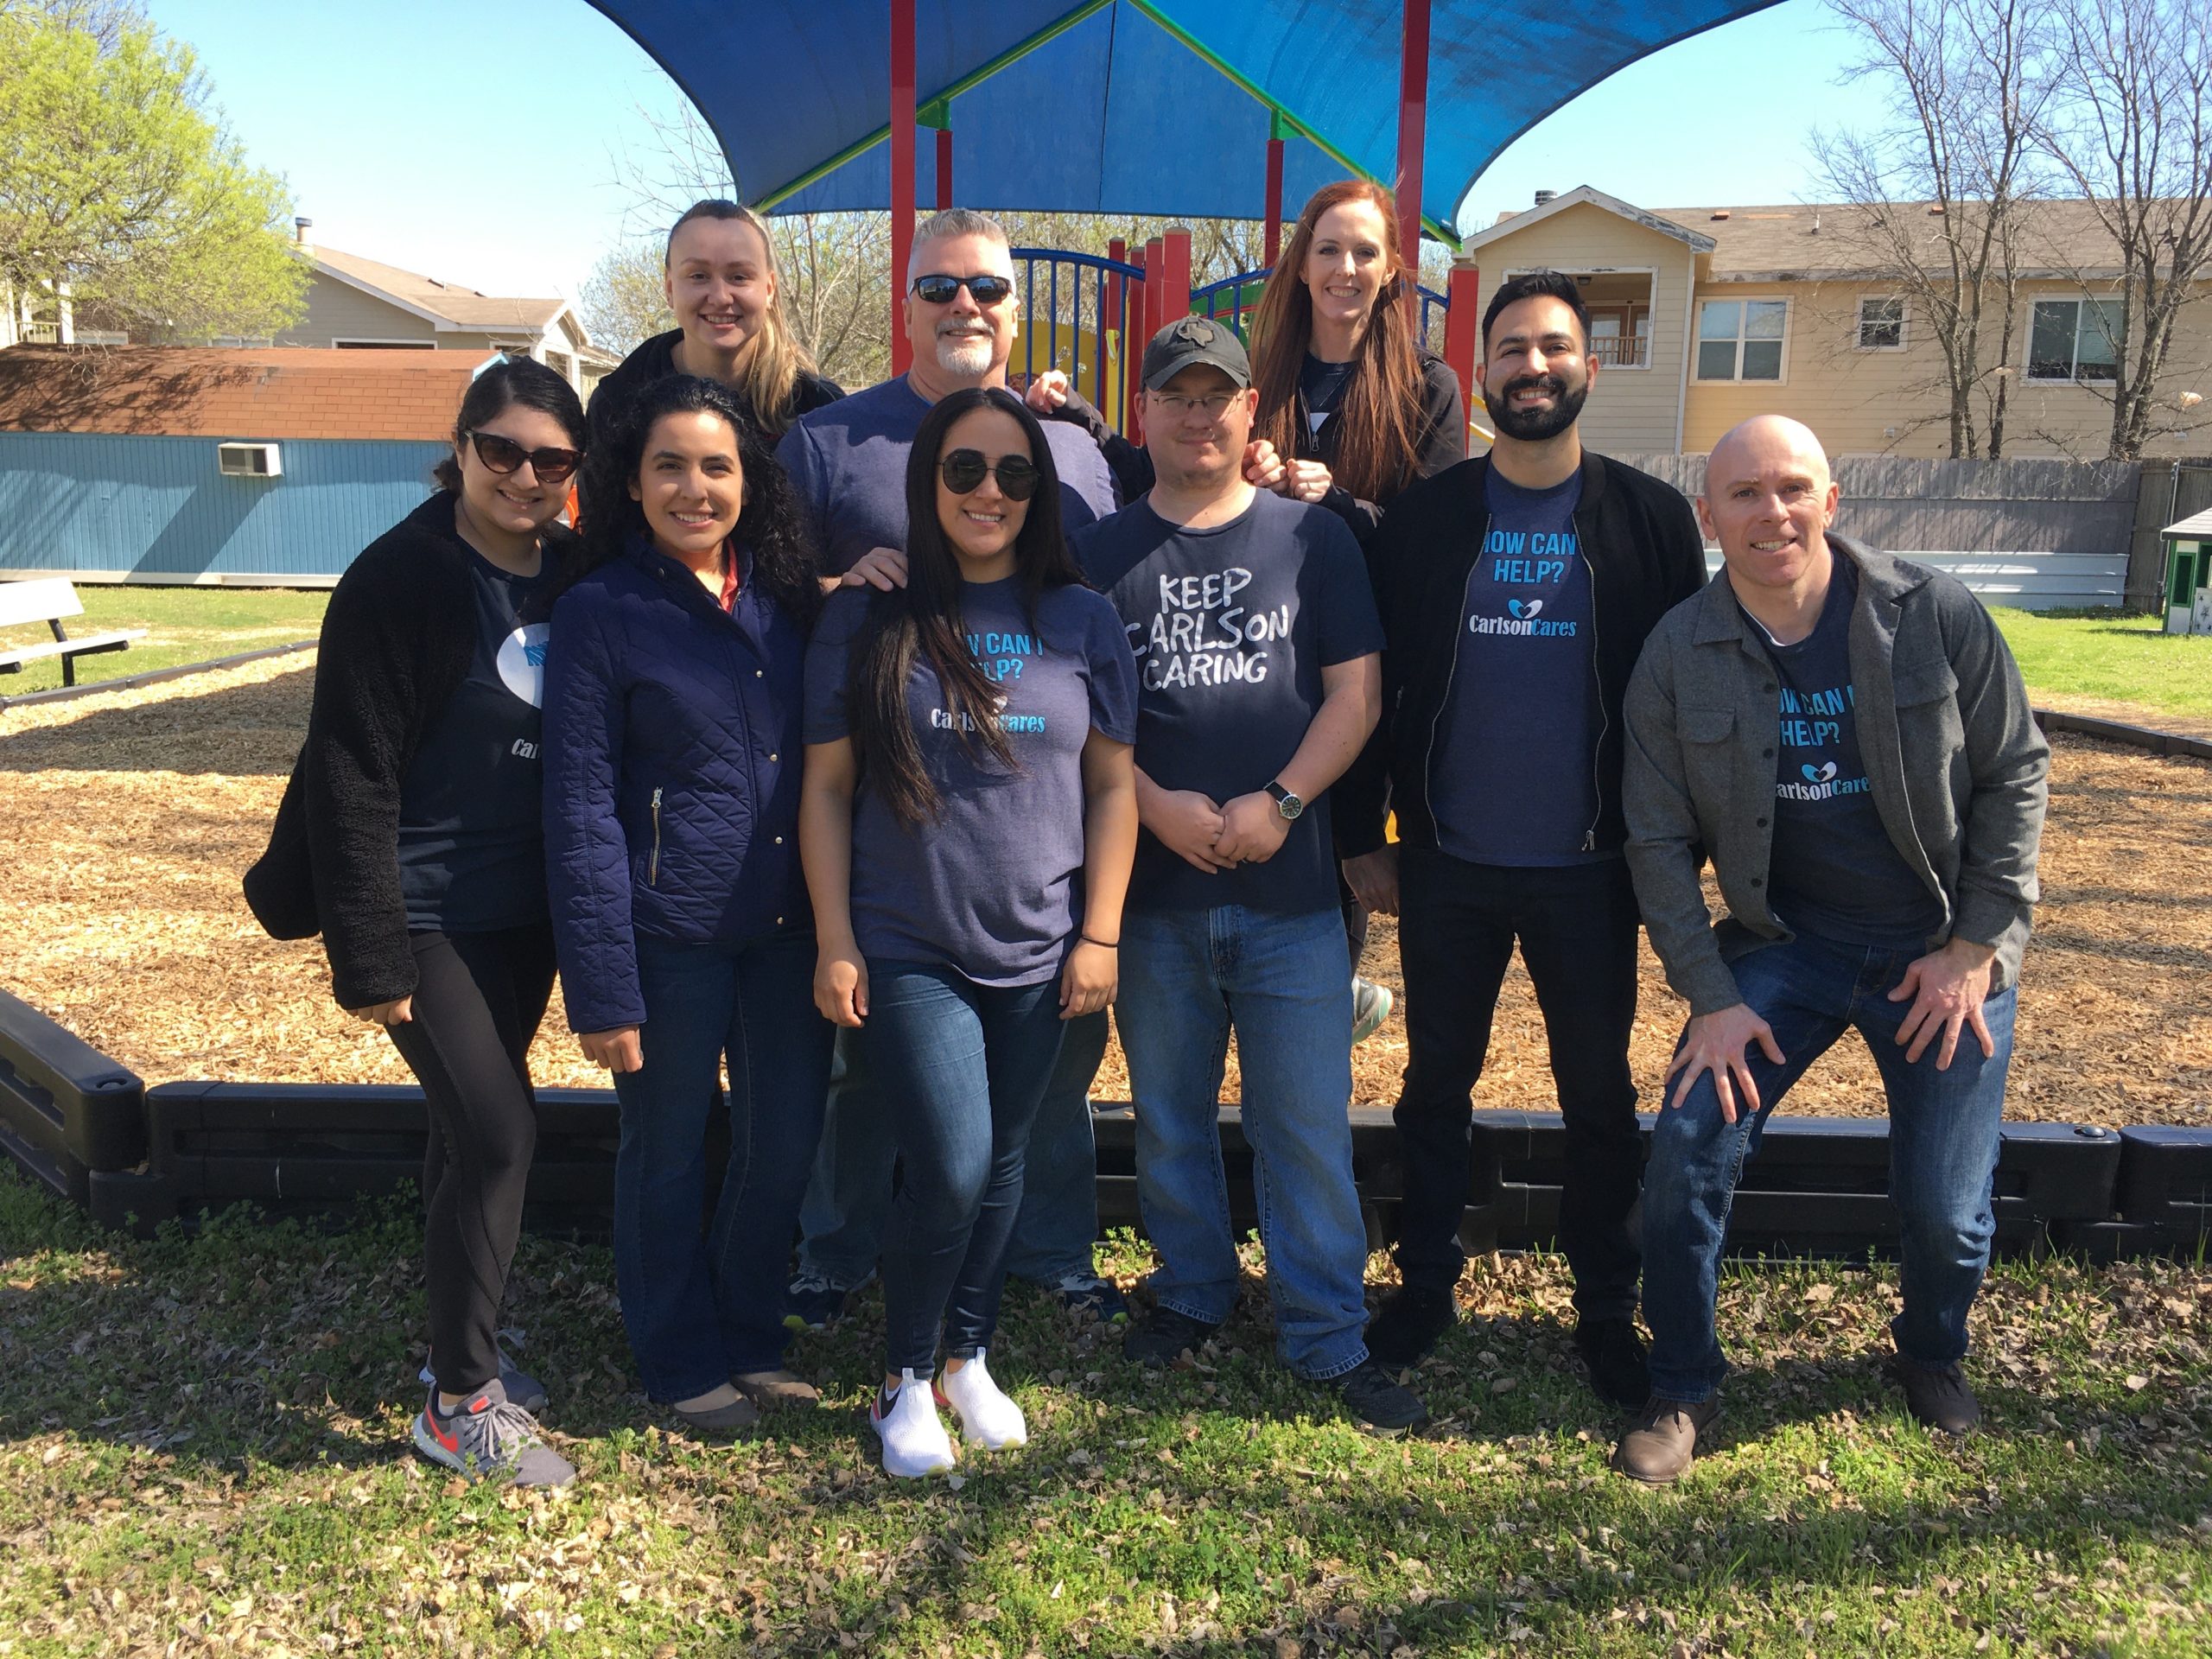 Carlson Law Firm employees volunteer as part of Carlson Cares at Alliance Hope in Austin, Texas.